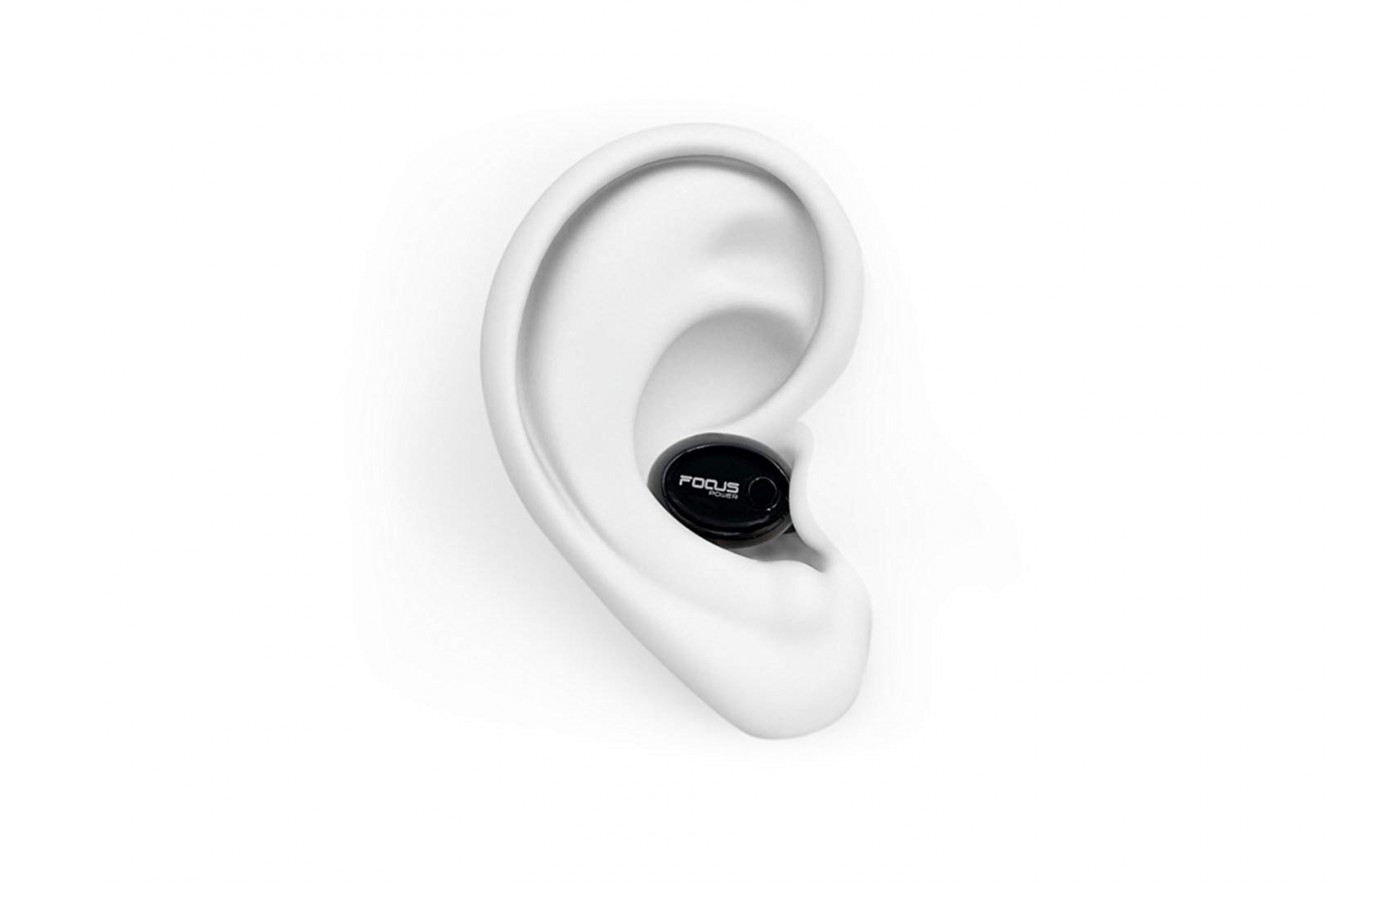 Stylishly discreet, this earbud surprisingly stays right where it is supposed to.